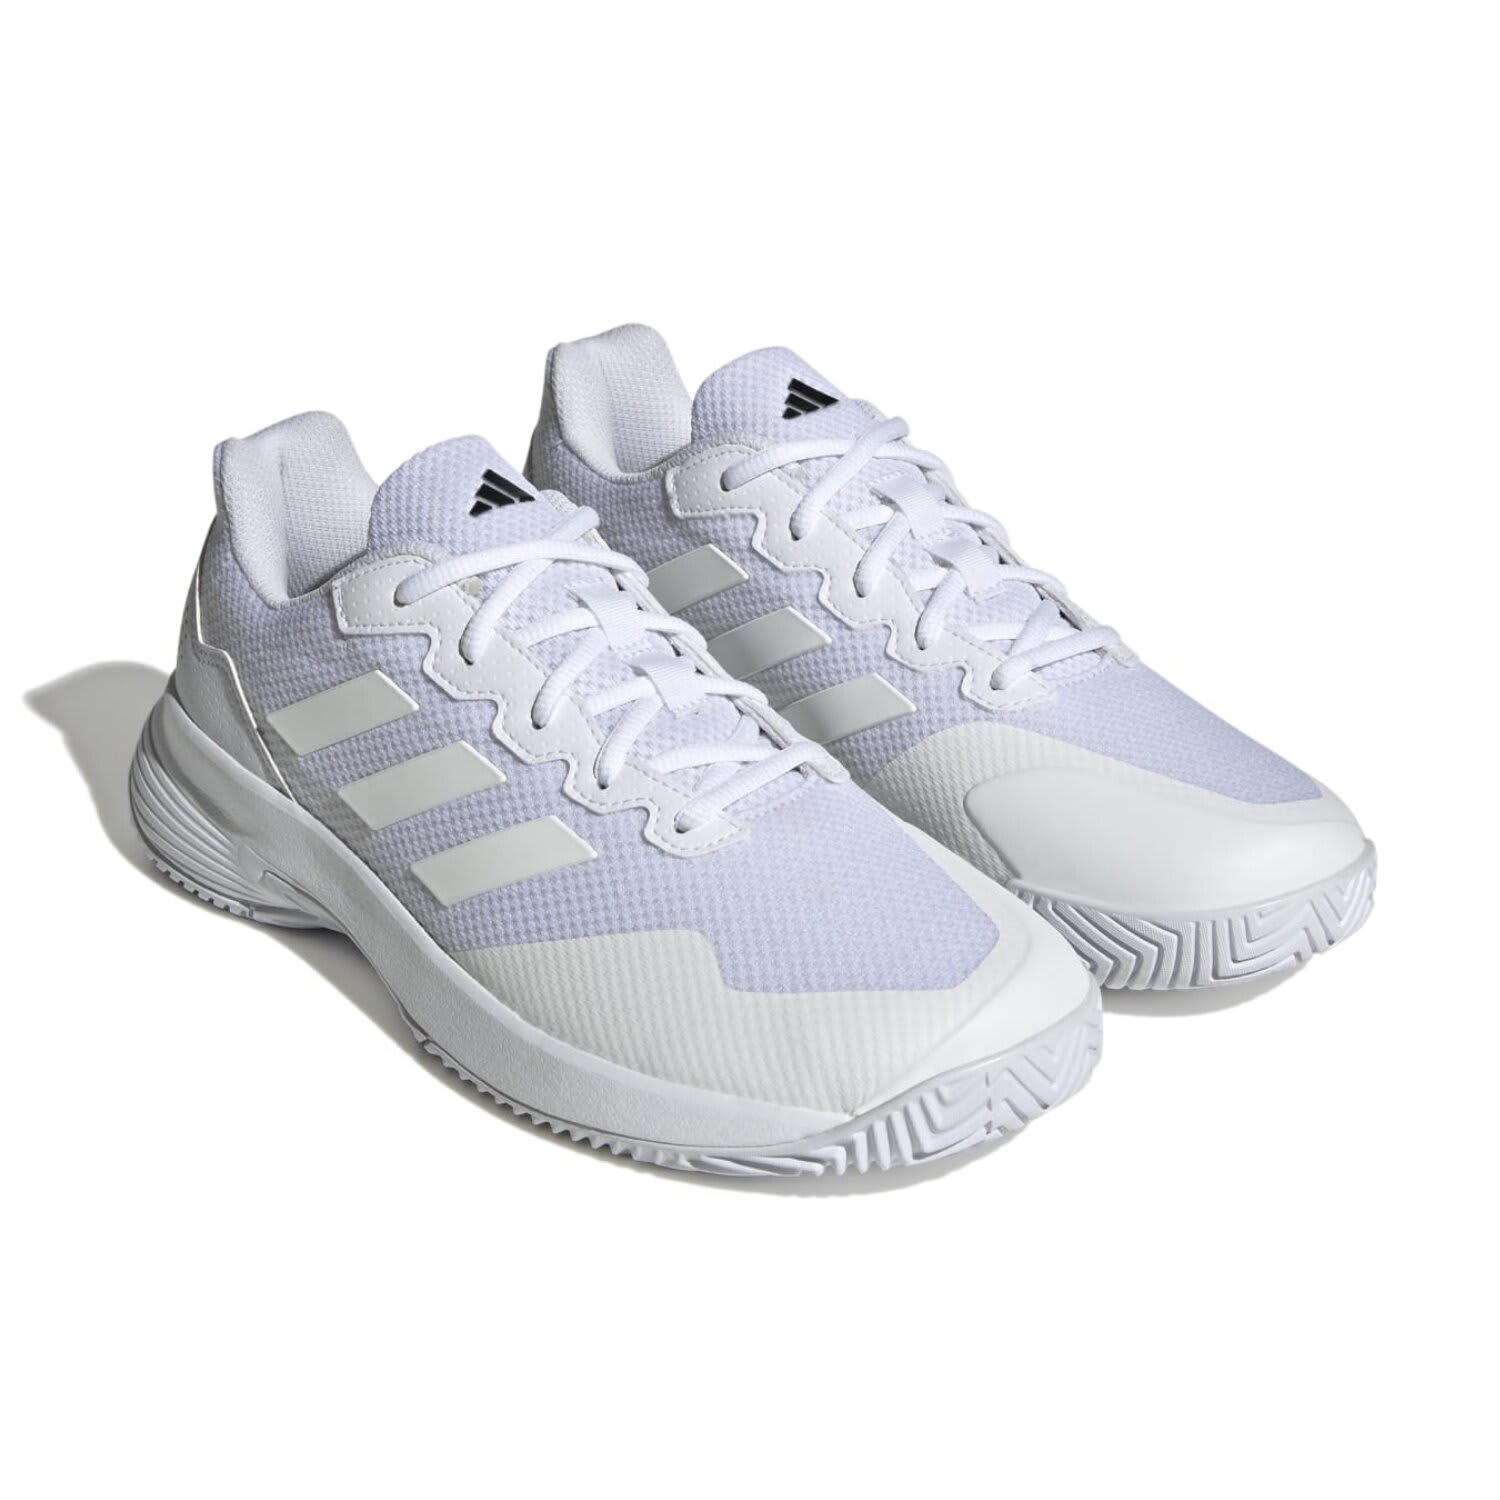 adidas Men's GameCourt 2 Tennis Shoes | by adidas | Price: R 1 399,9 ...